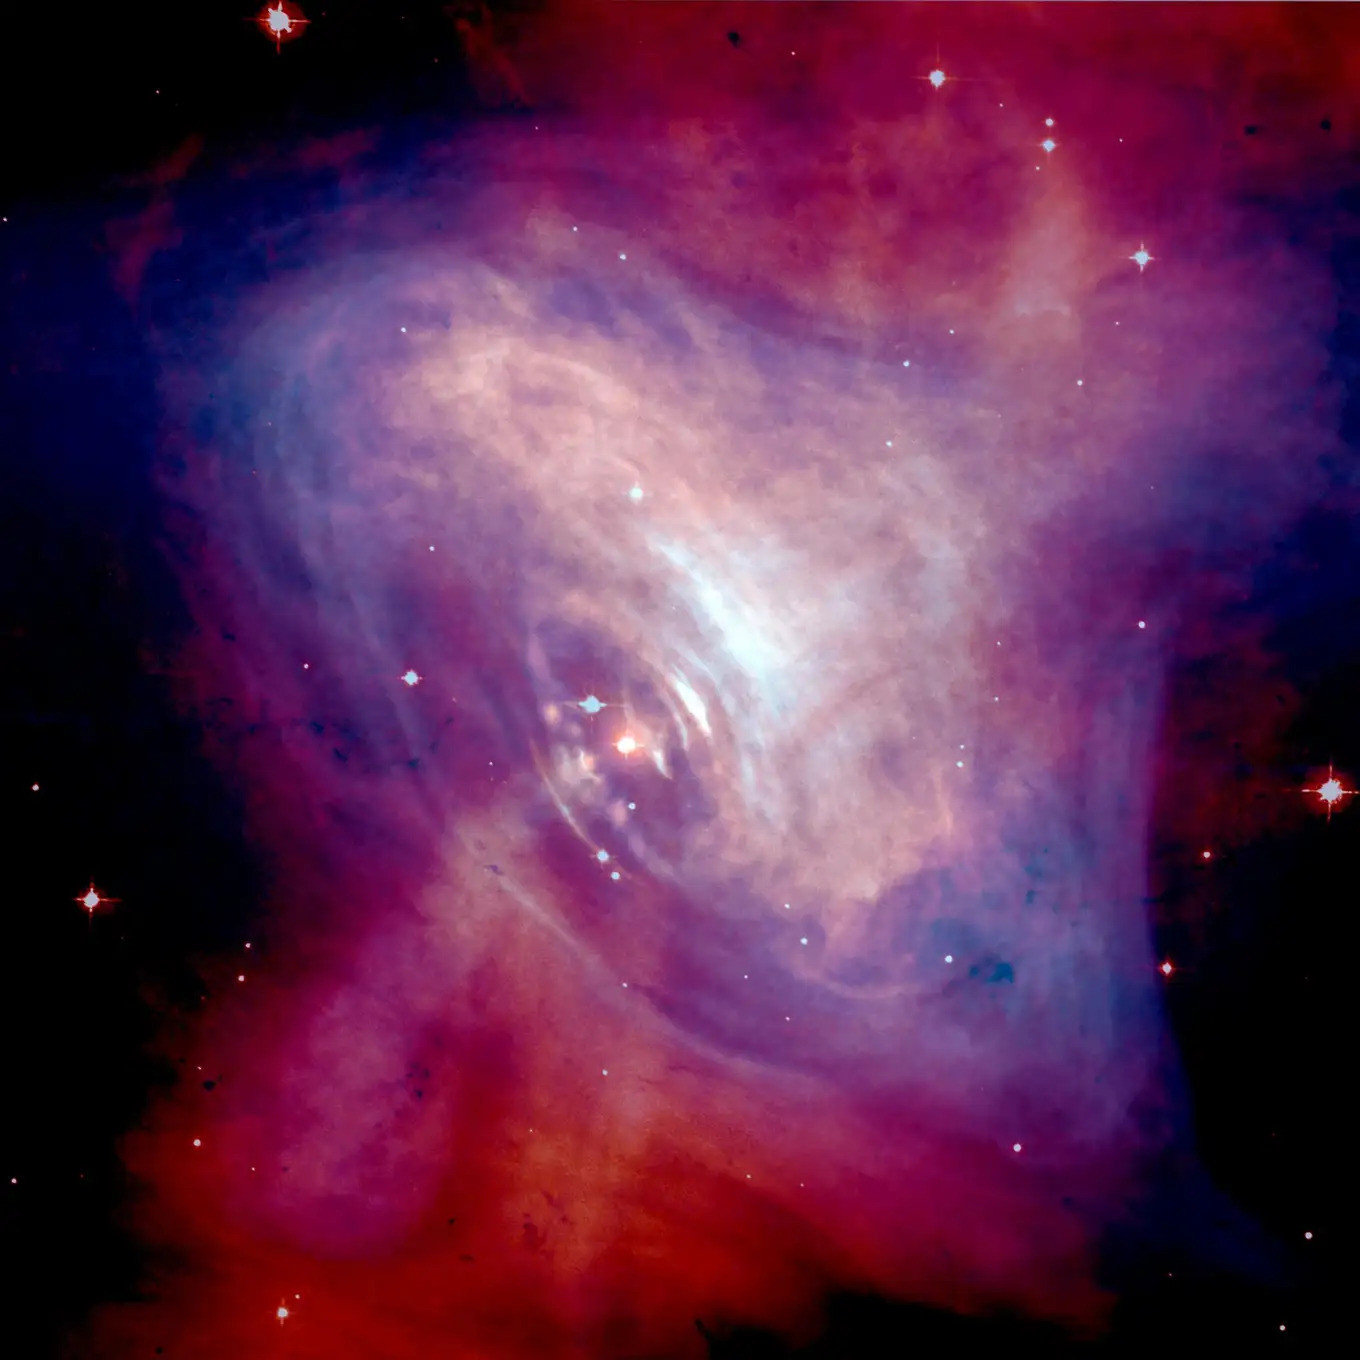 The Crab Nebula – a remnant of a supernova explosion which in its center contains a pulsar. The pulsar makes the ordinary matter in the form of gas in the nebula light up. As the researchers have now shown, it may do the same with dark matter in the form of axions, leading to a subtle additional glow that can be measured. Image: NASA/CXC/ASU/J. Hester et al.